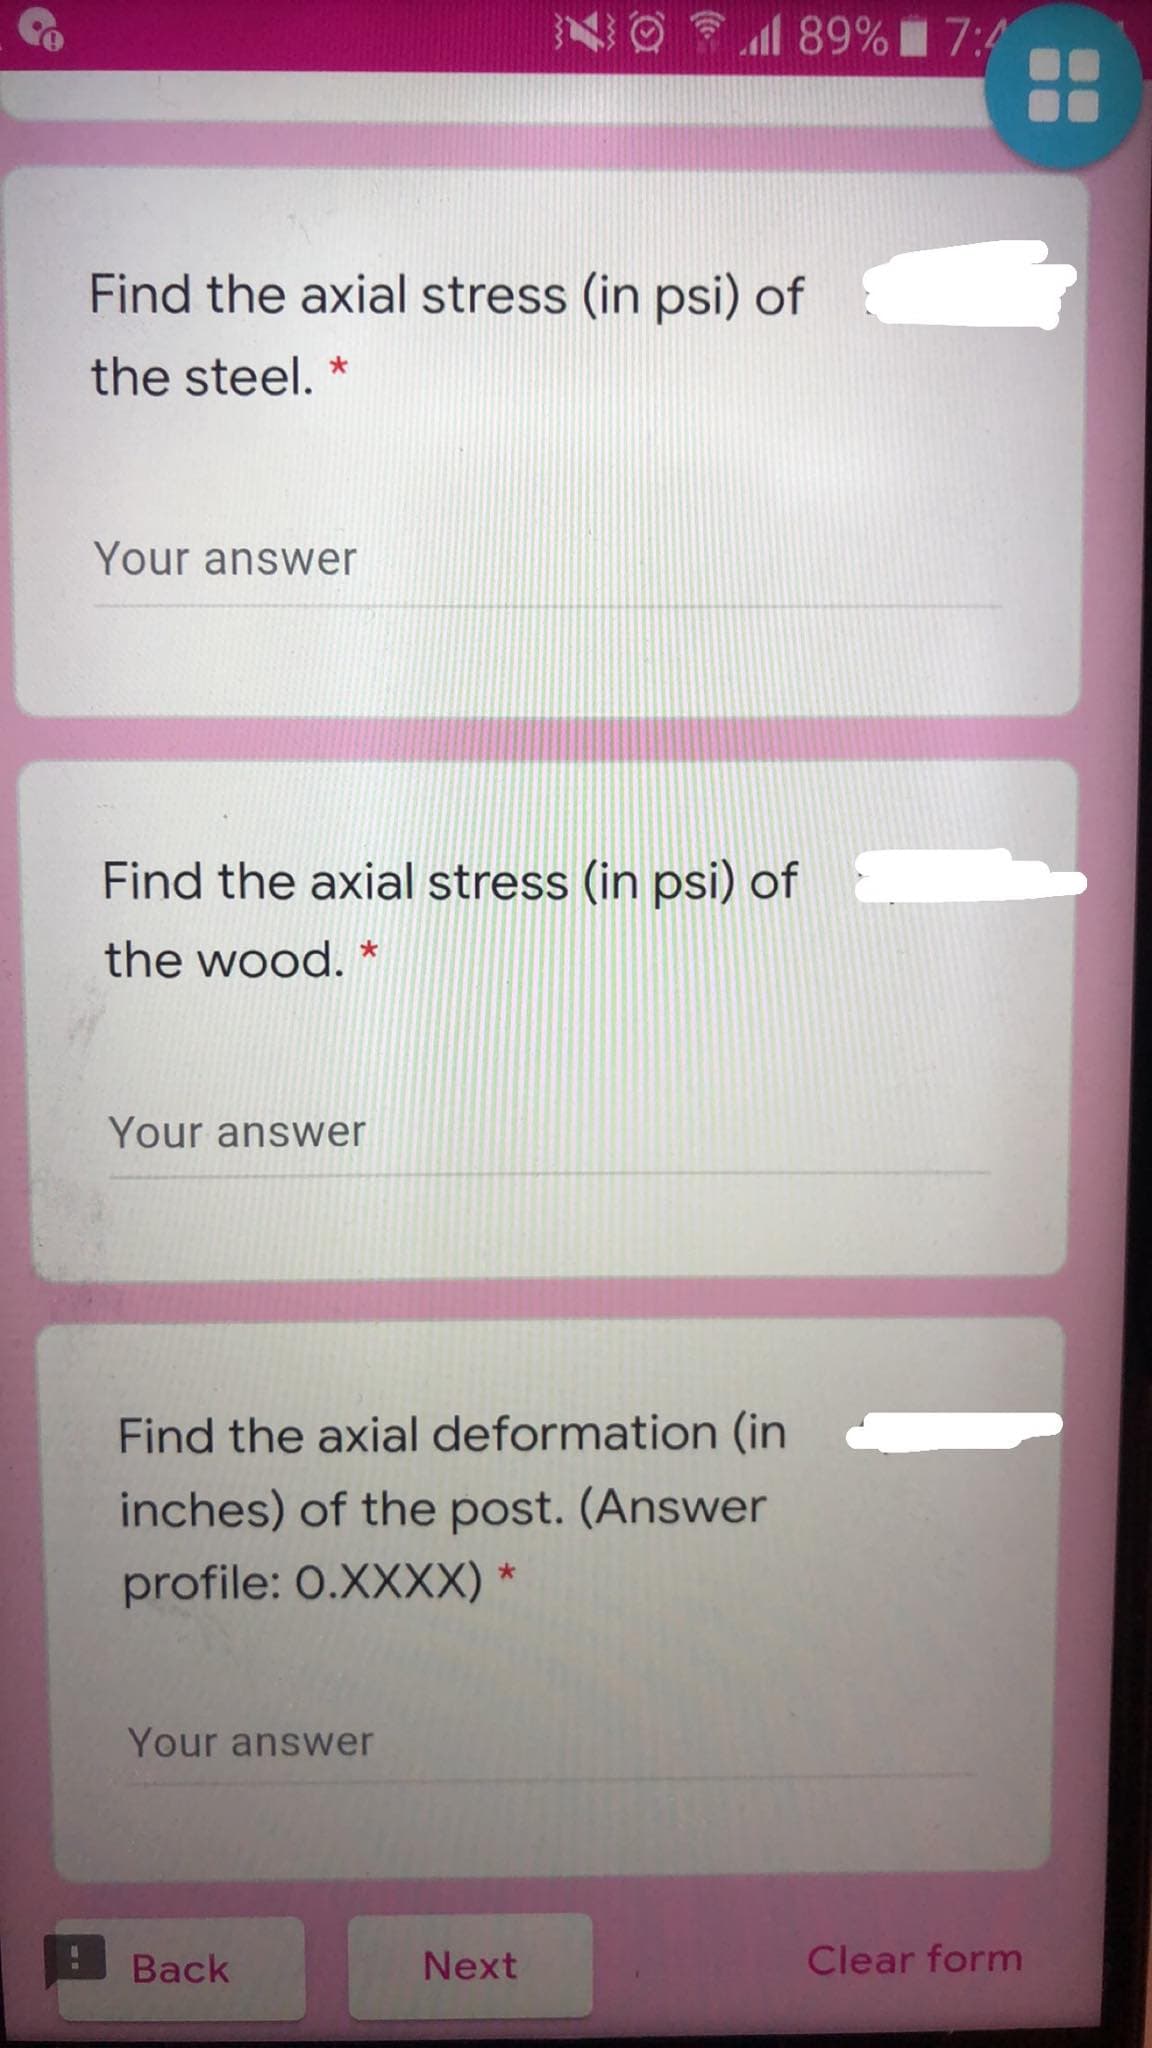 89% 7:4
Find the axial stress (in psi) of
the steel.
Your answer
Find the axial stress (in psi) of
the wood. *
Your answer
Find the axial deformation (in
inches) of the post. (Answer
profile: 0.XXXX) *
Your answer
Back
Next
Clear form
